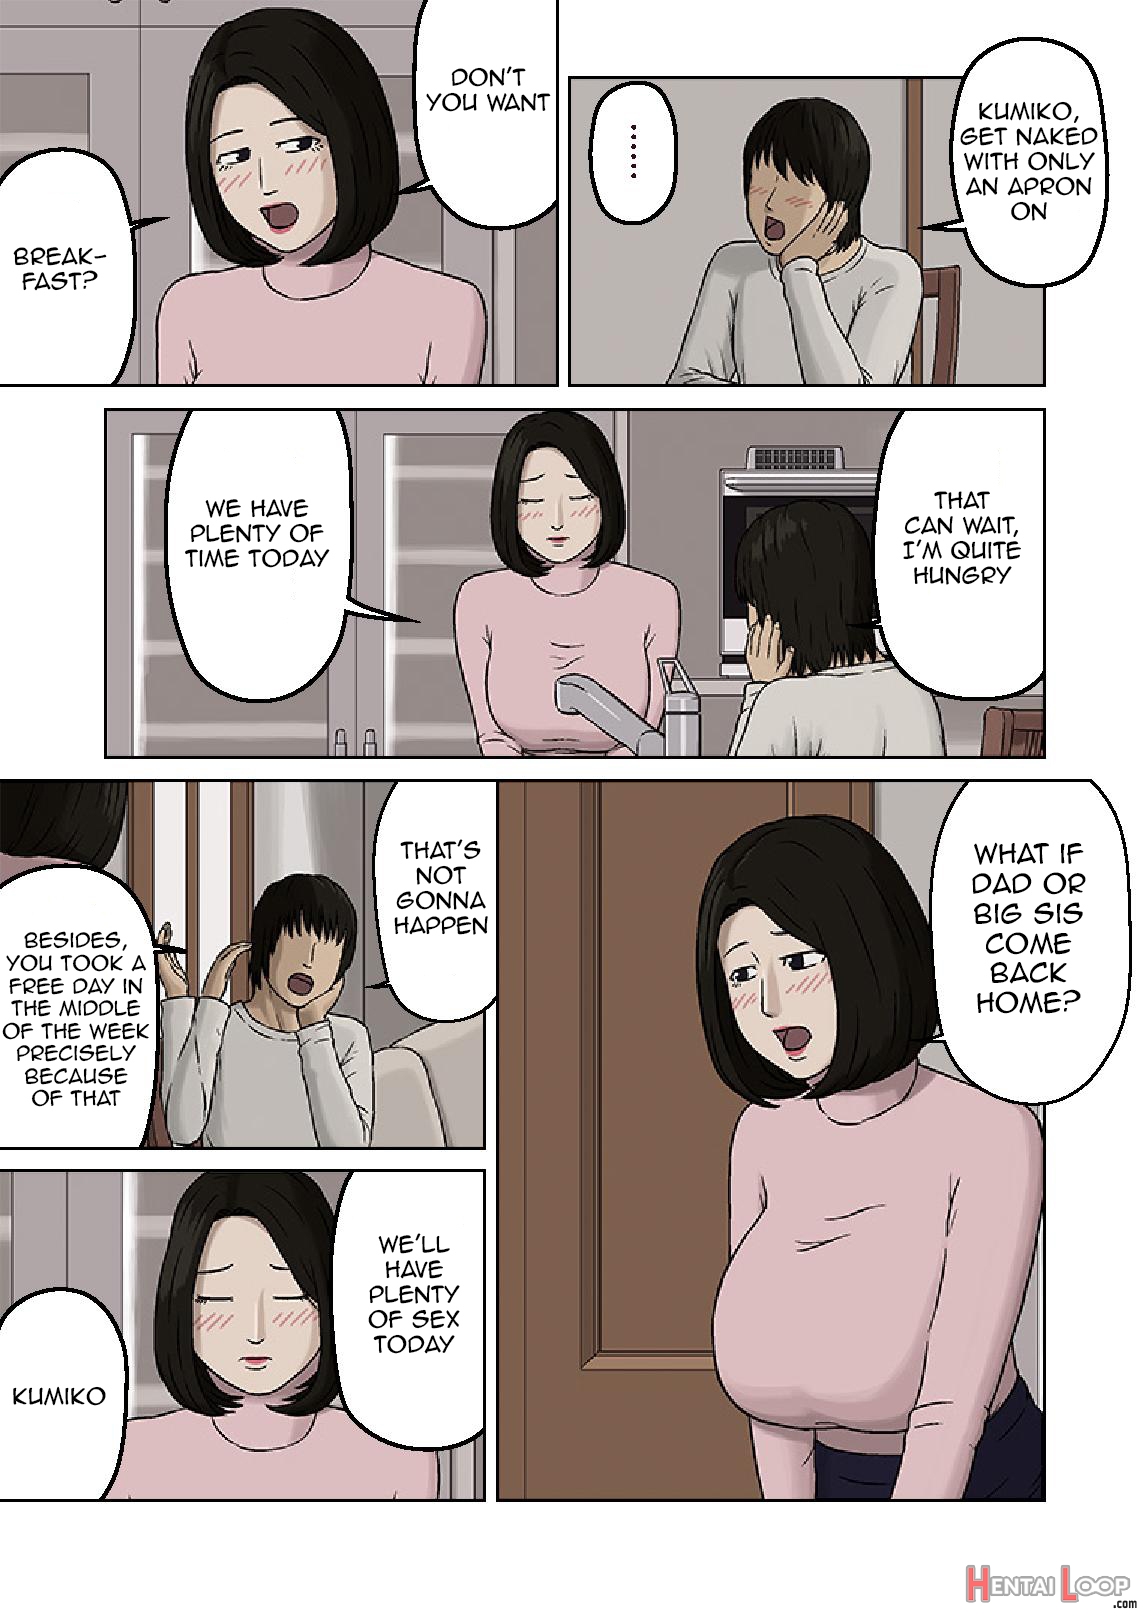 Kumiko And Her Naughty Son page 6